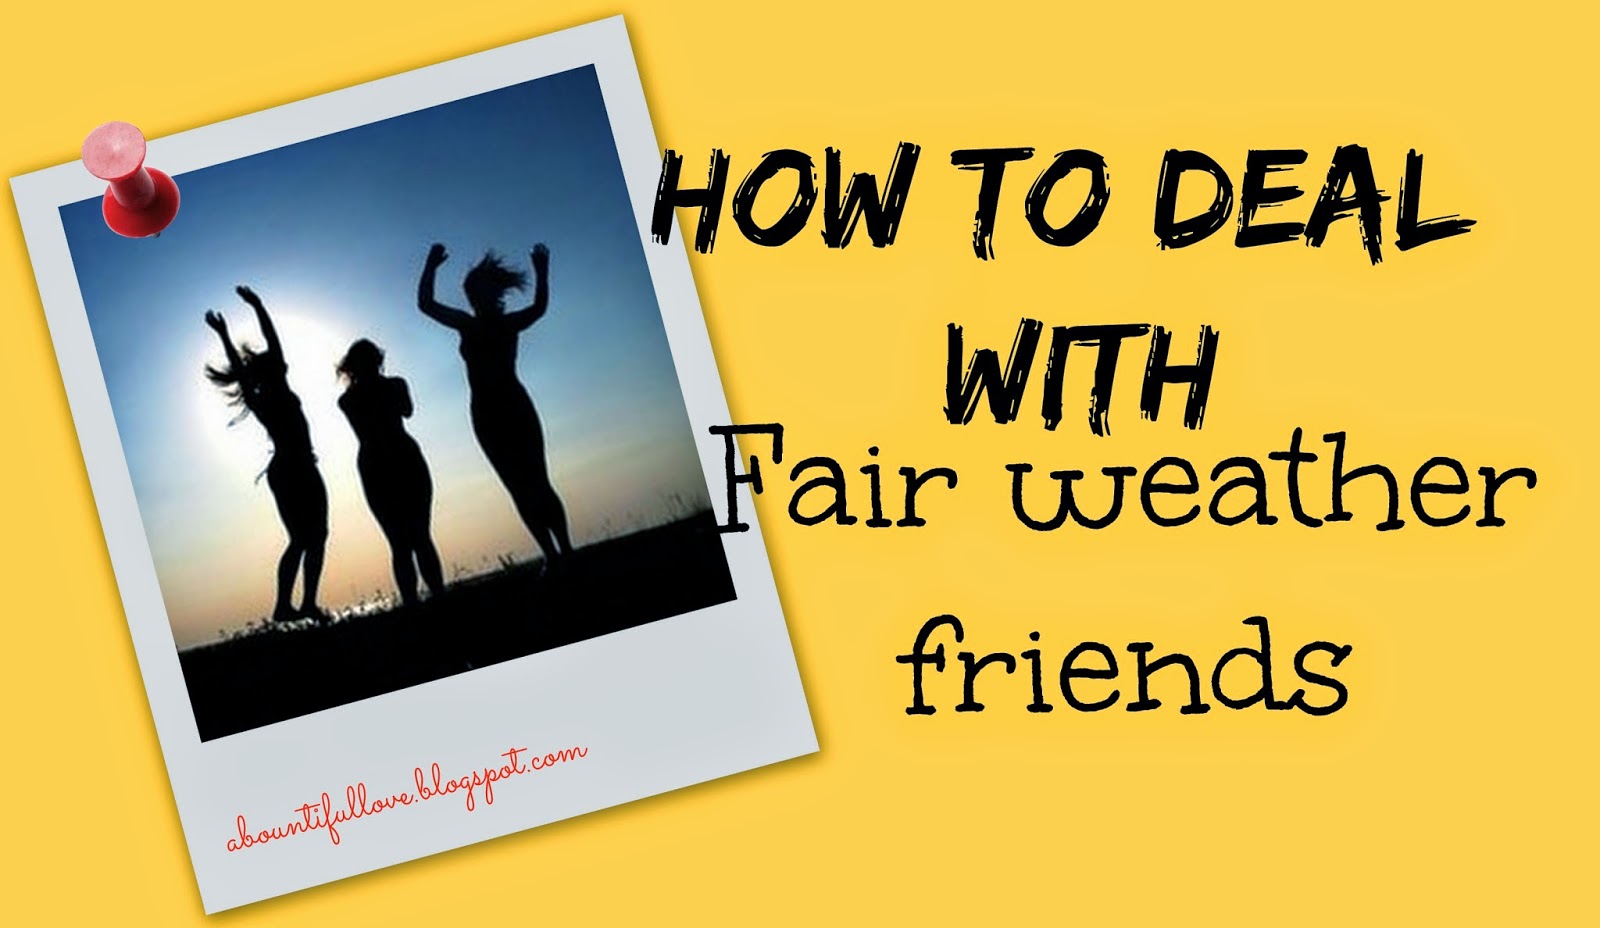 fair weather friends quotes